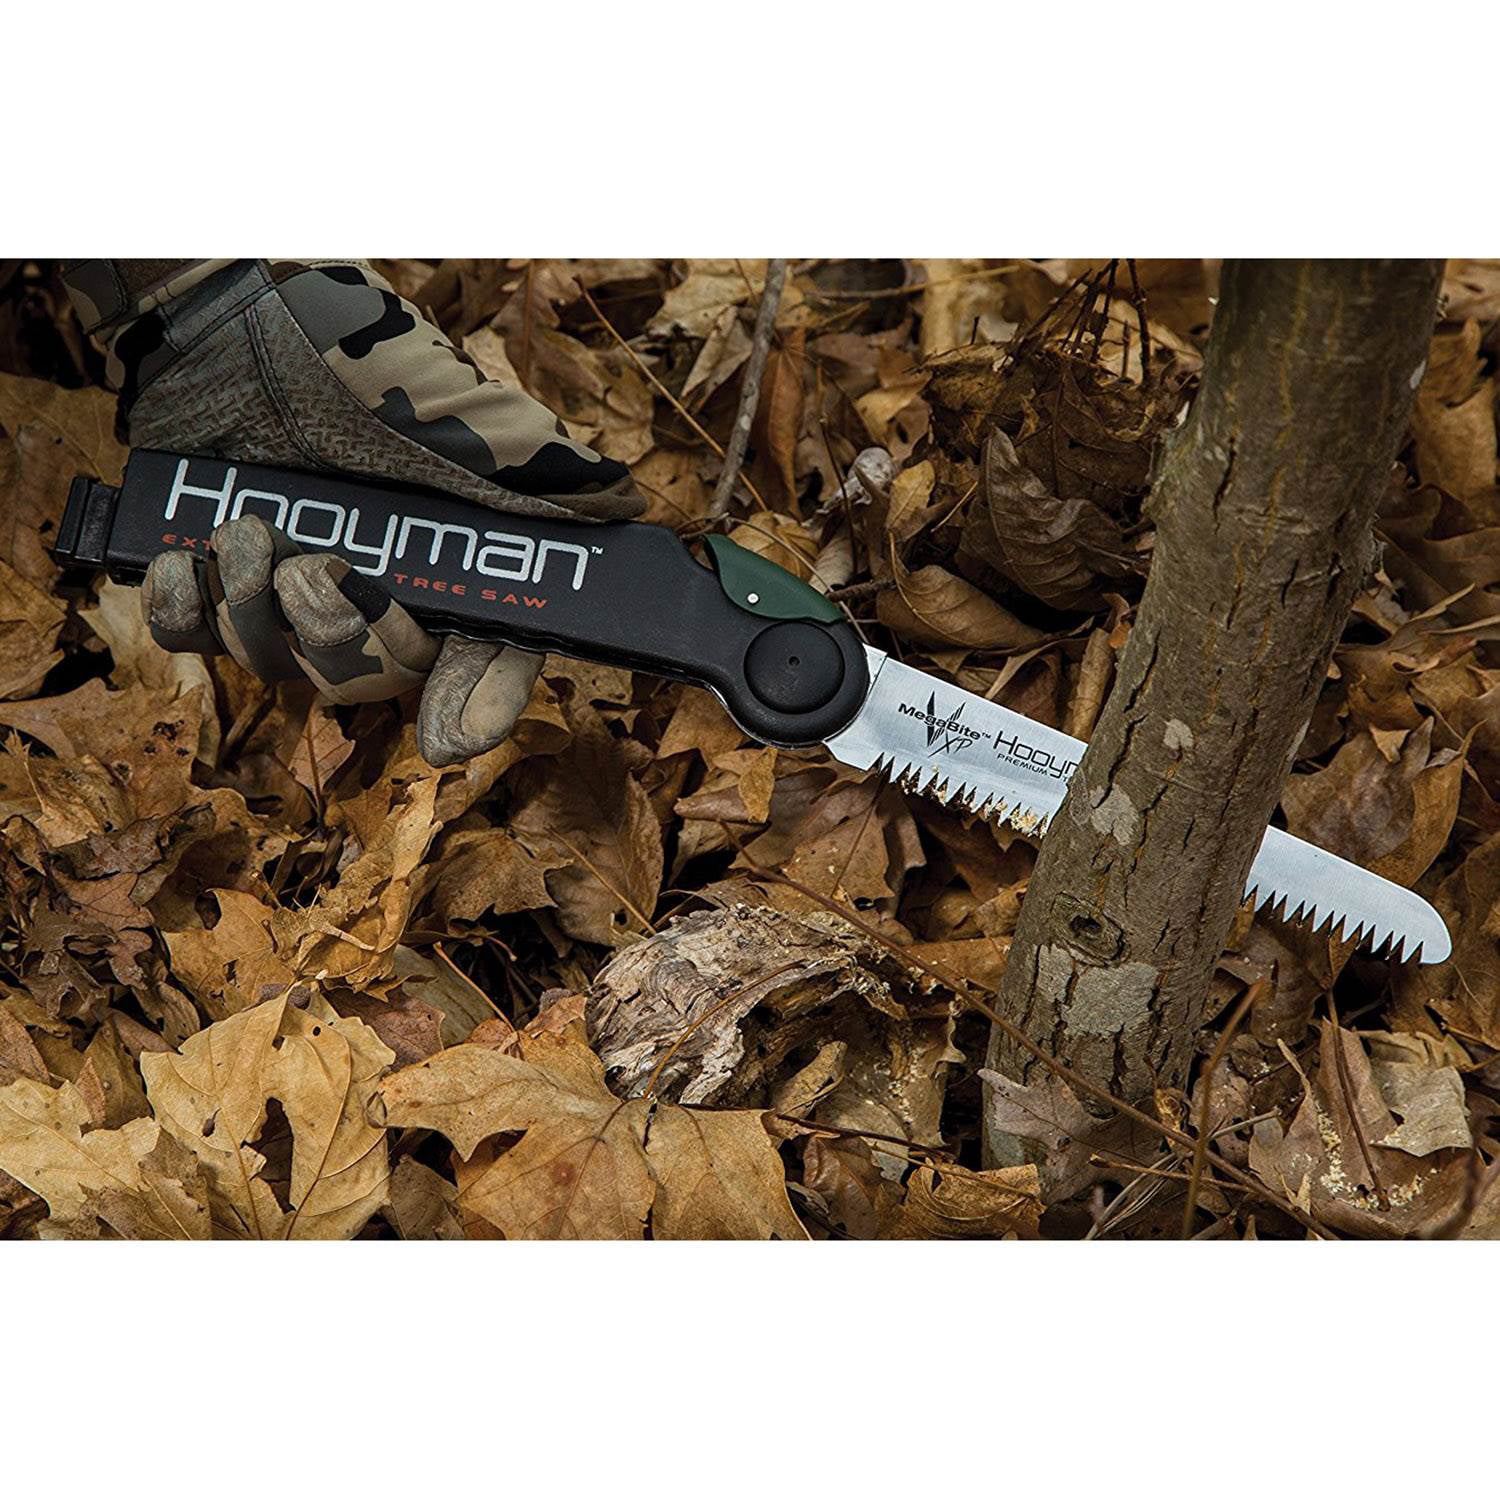 Hooyman 655226 5 Foot Extendable Tree Saw with Wrist Lanyard and Sling for and 